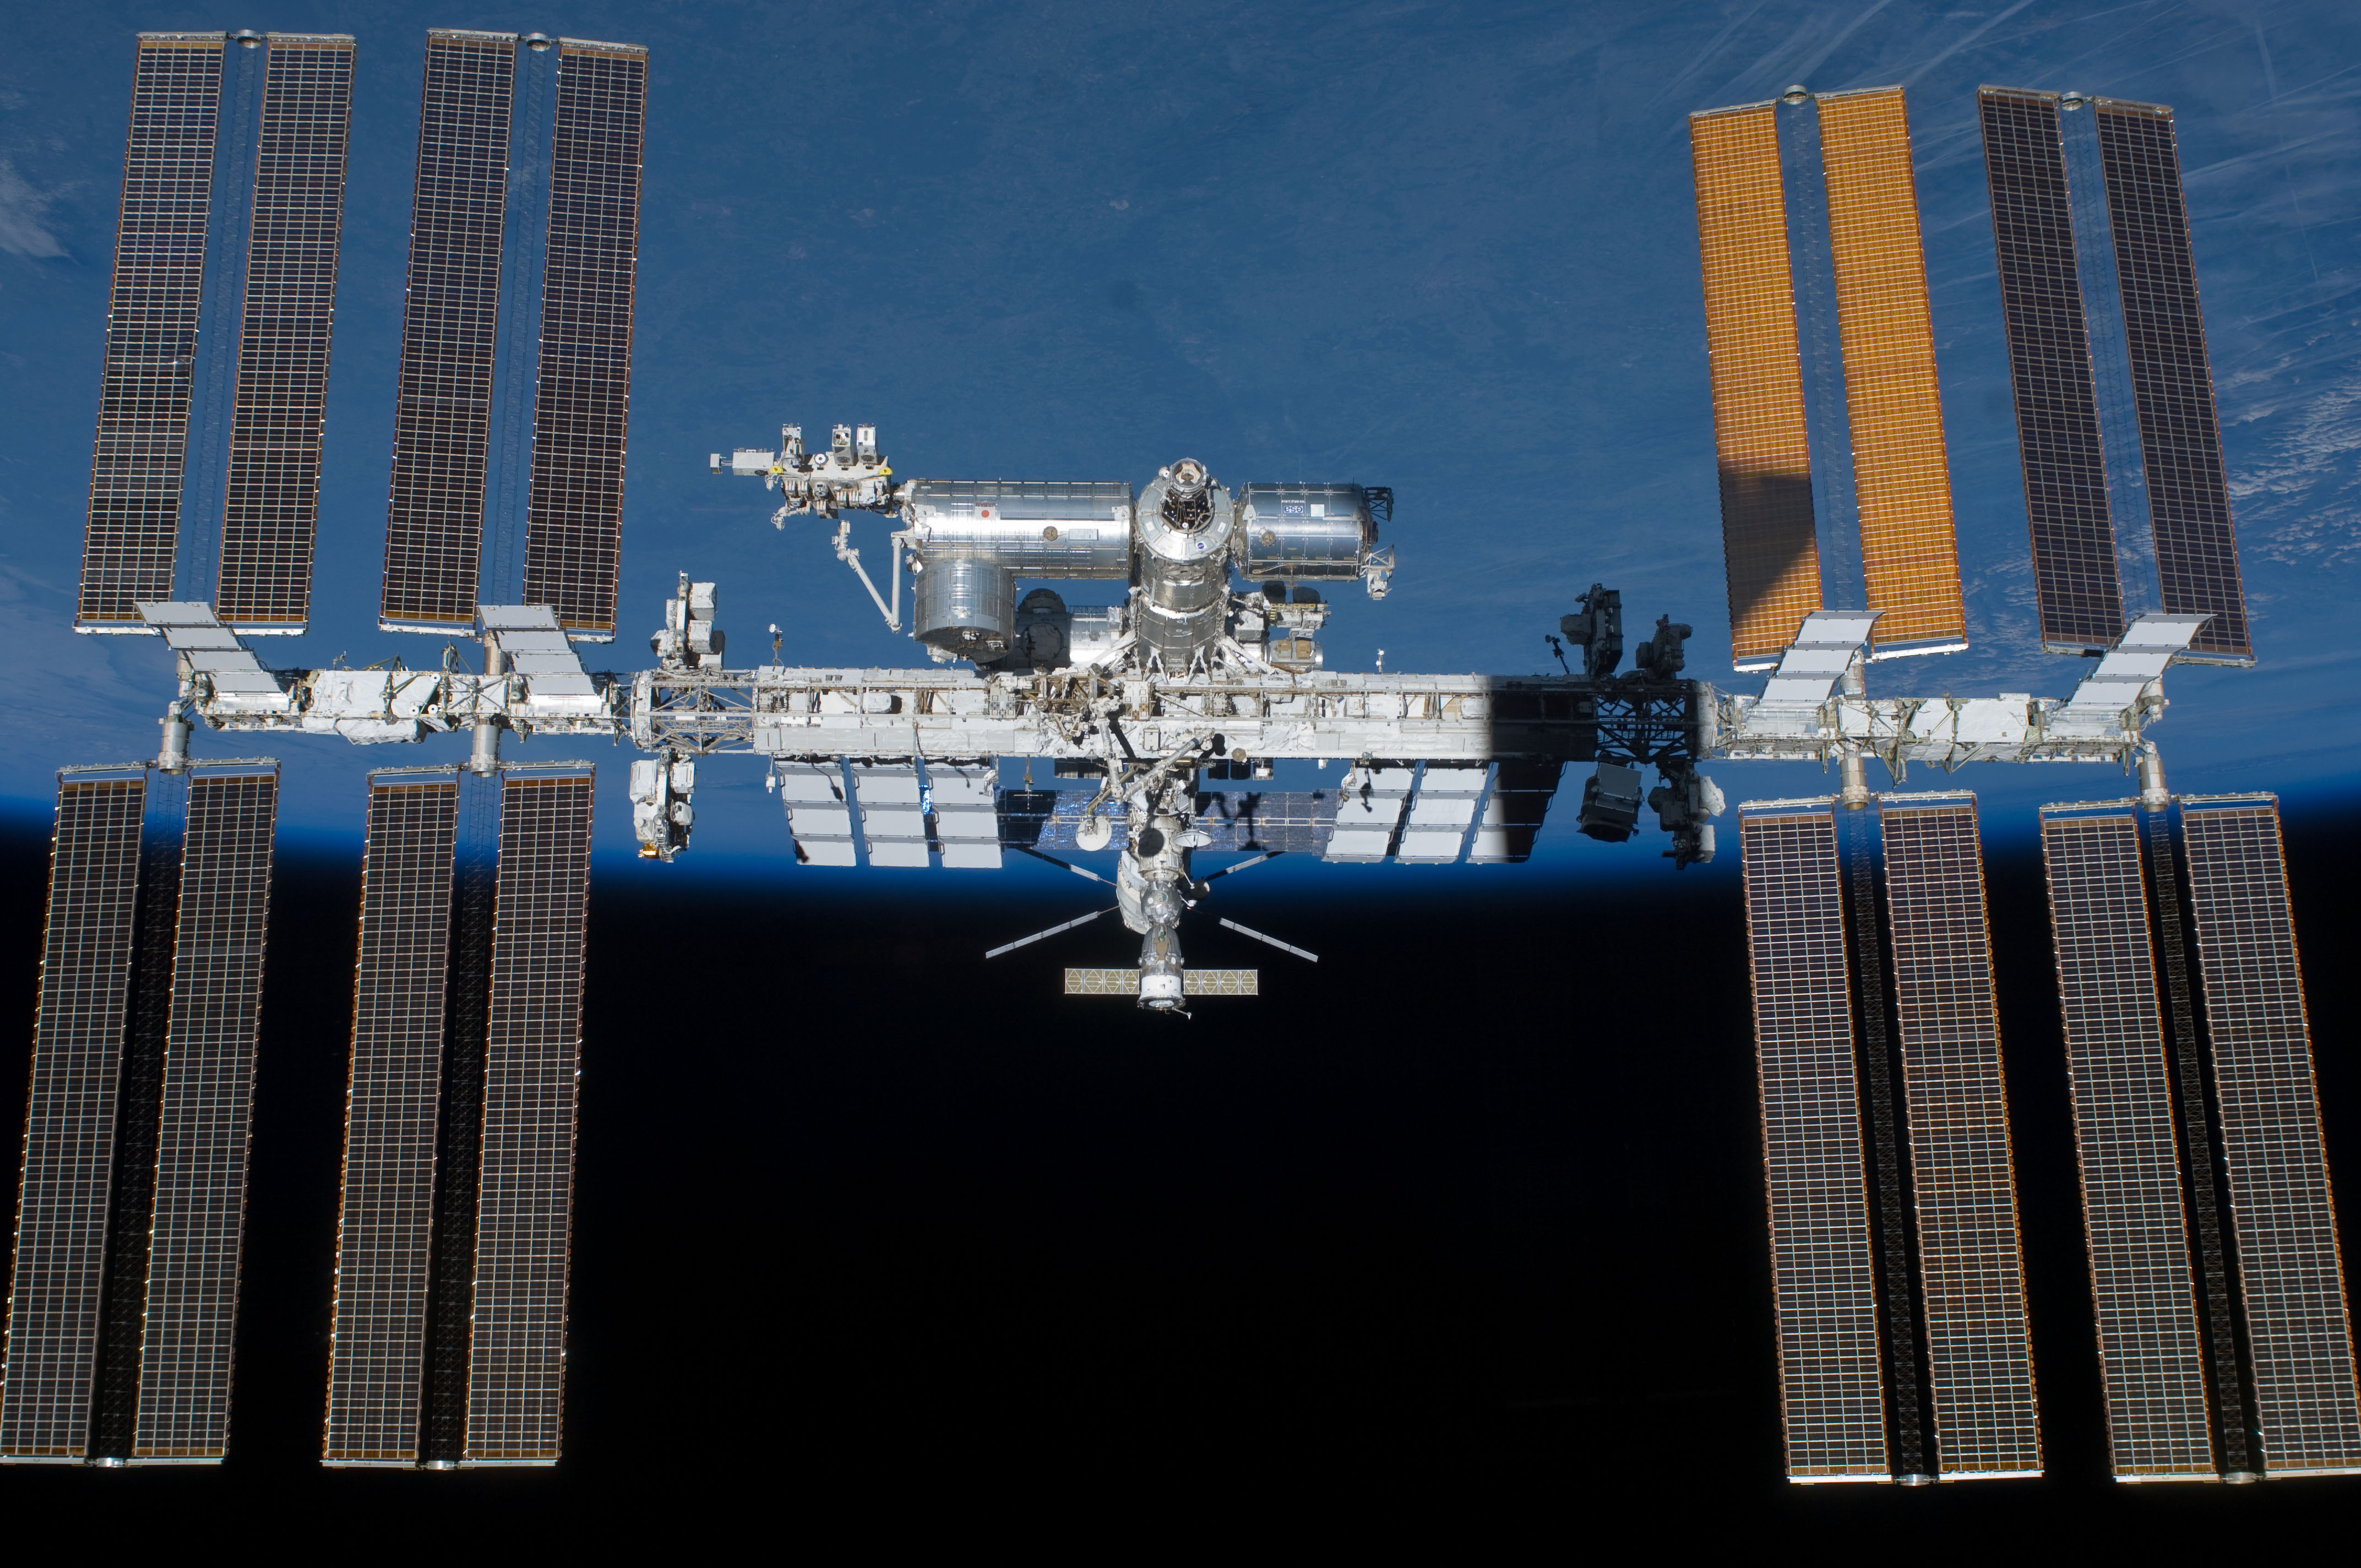 The International Space Station: Putin won't come to play anymore